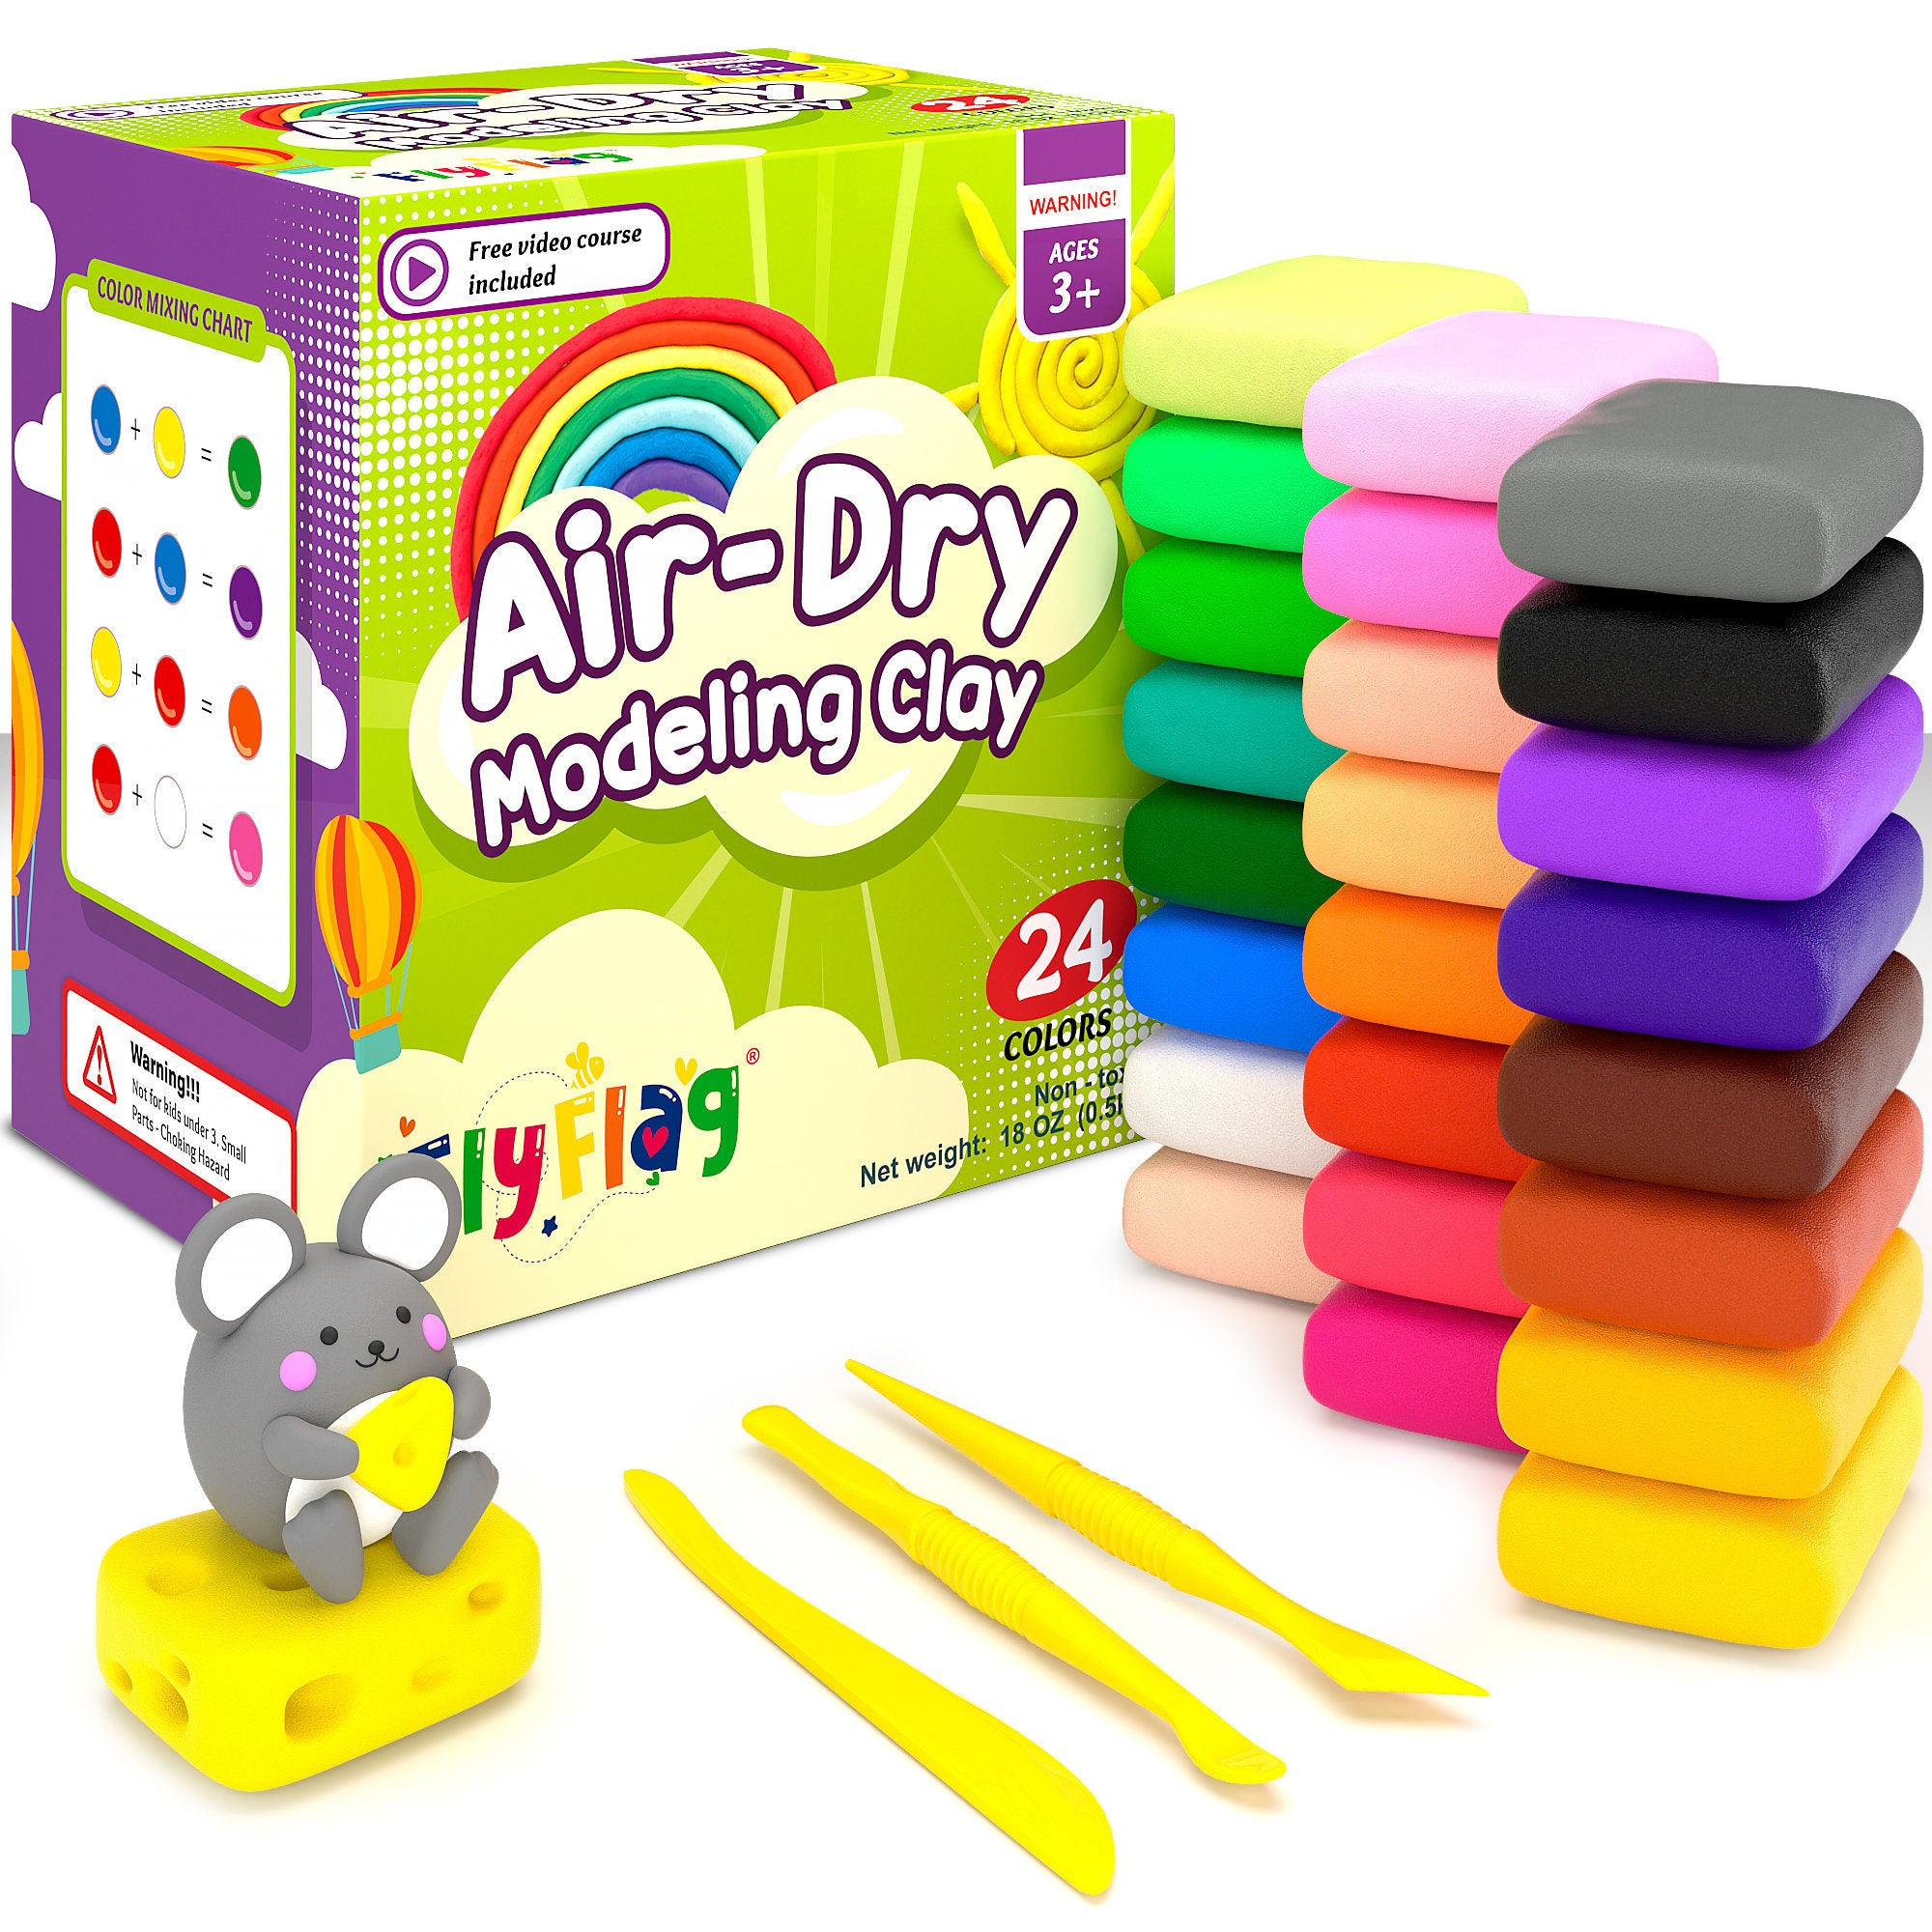 Patarev 10 Colors modeling clay NEW